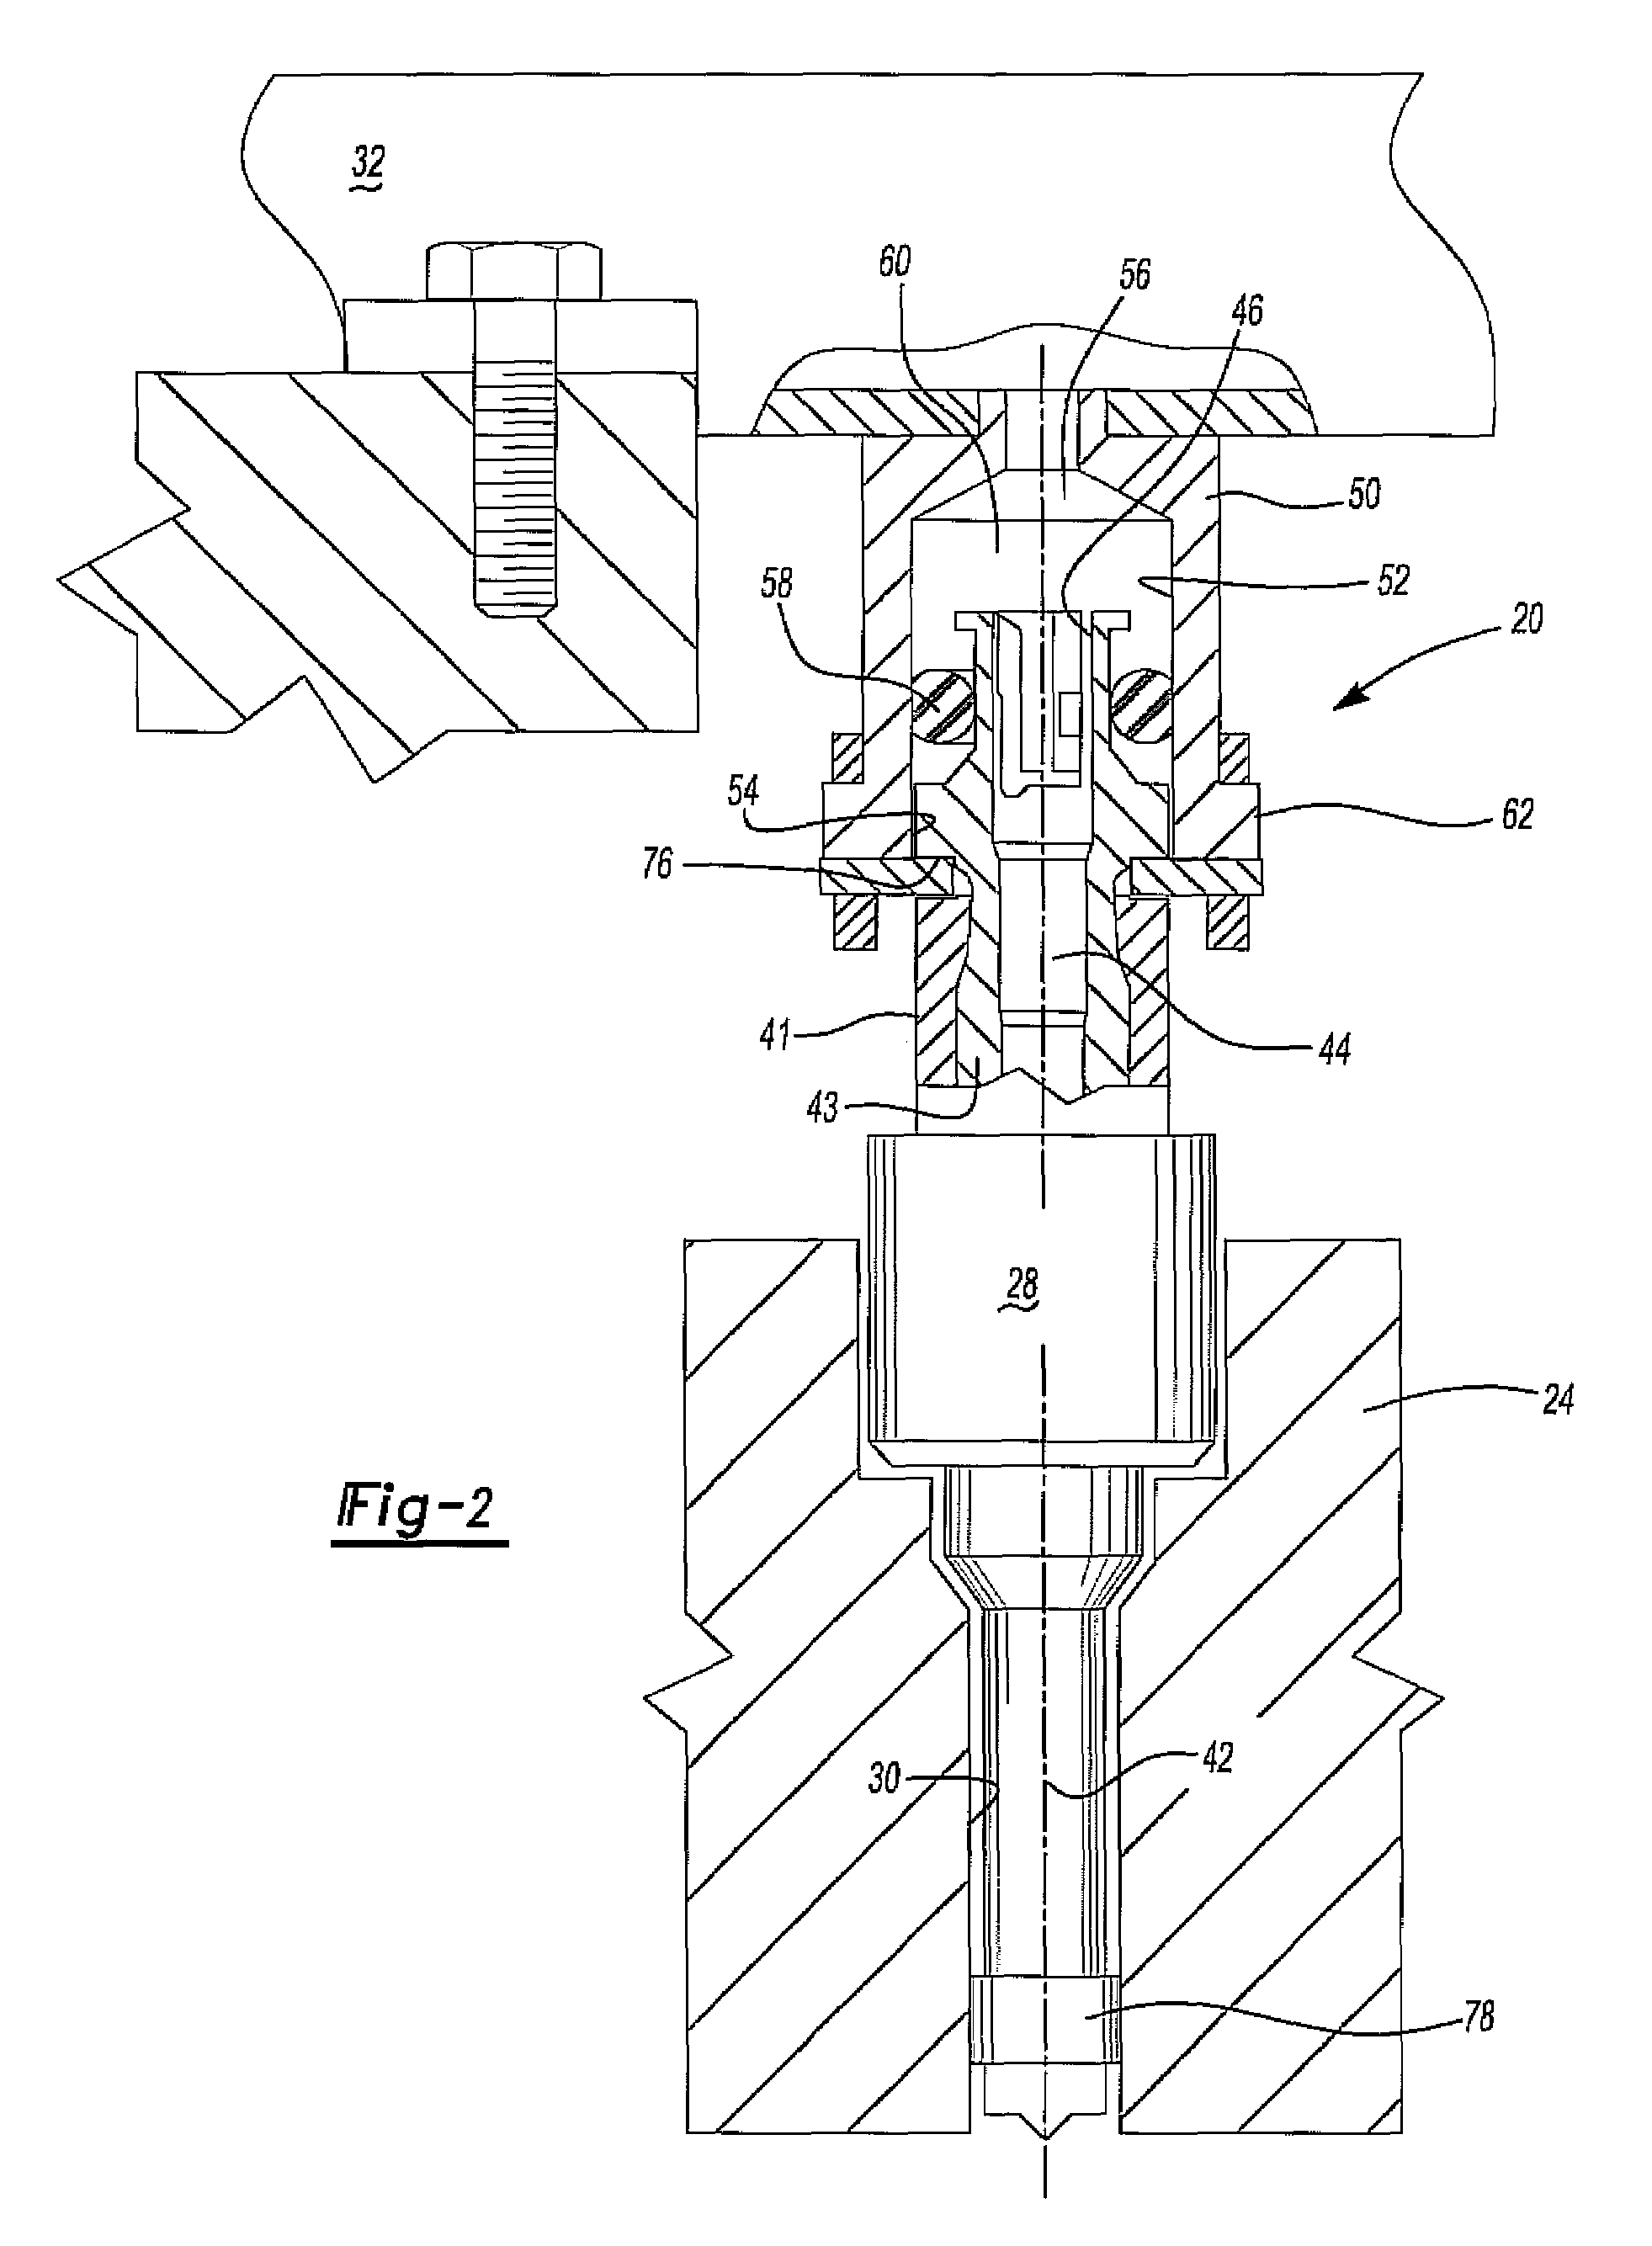 Method and apparatus for attenuating fuel pump noise in a direct injection internal combustion chamber